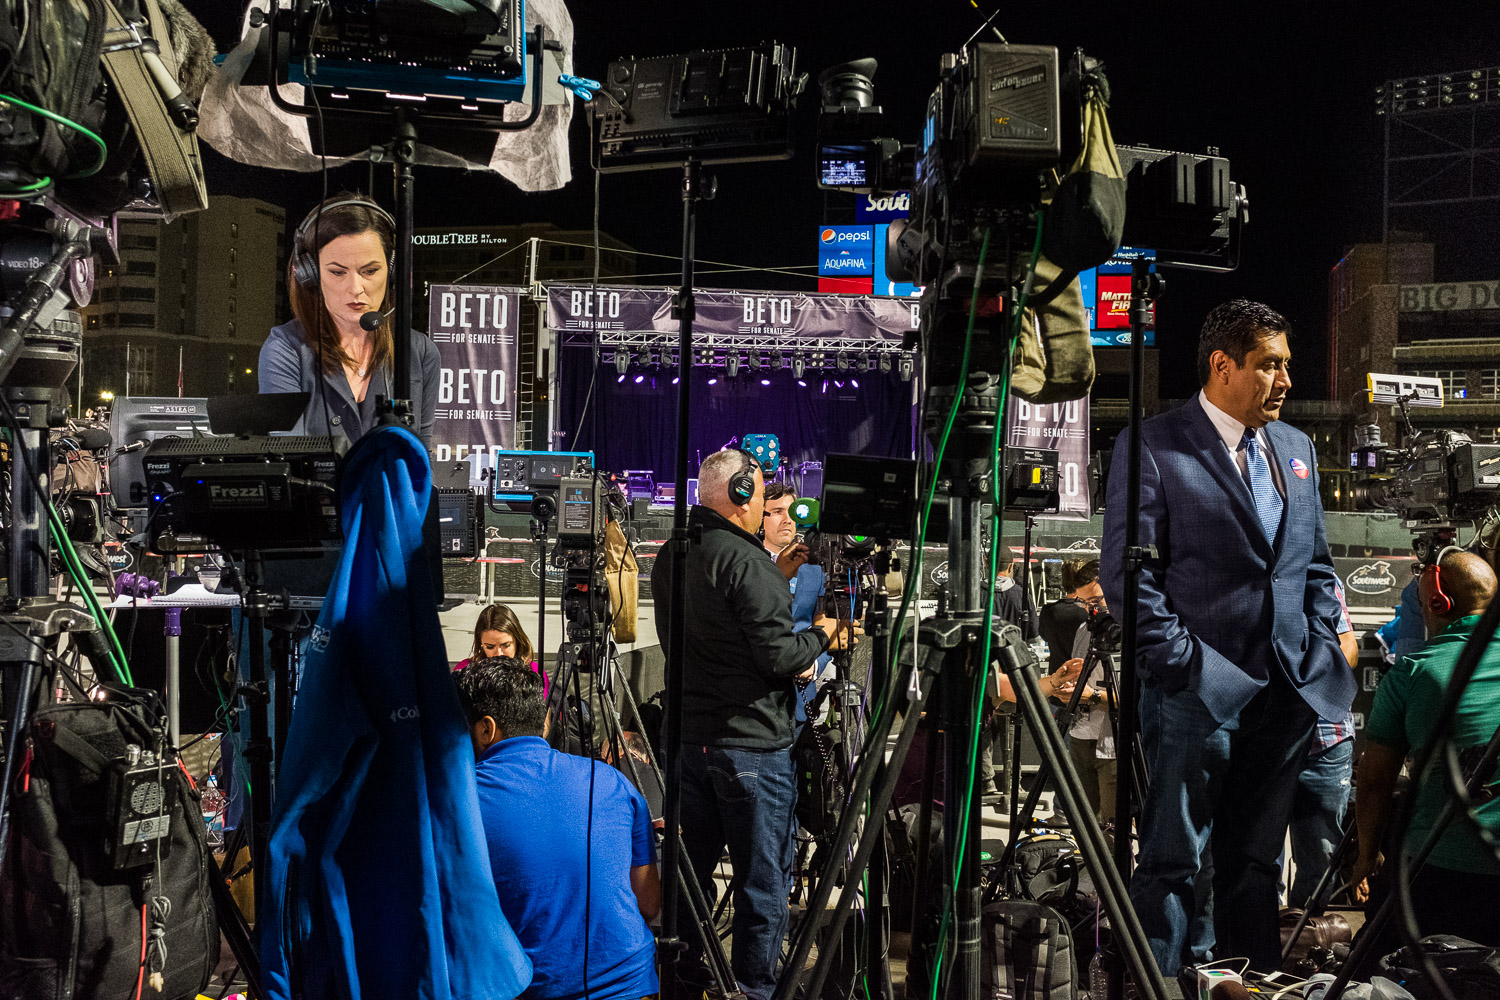  Media during election night for Beto O’Rourke, El Paso, Texas, 2018. On assignment for New Yorker Magazine. 